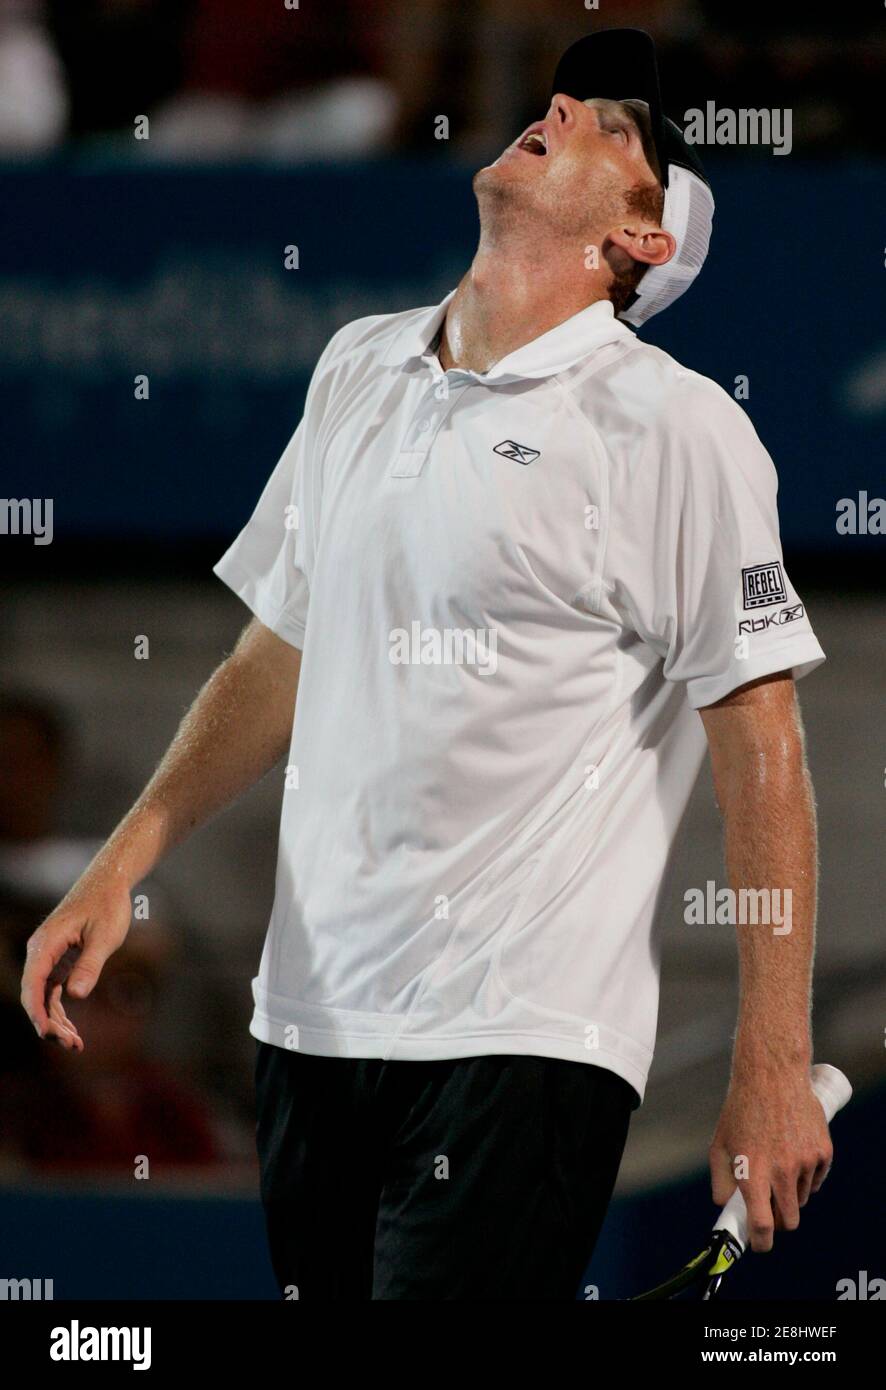 Australia's Chris Guccione reacts to a missed shot during his loss to Russia's Dmitry Tursunov in the men's singles final at the Sydney International tennis tournament January 12, 2008. REUTERS/Will Burgess    (AUSTRALIA) Stock Photo